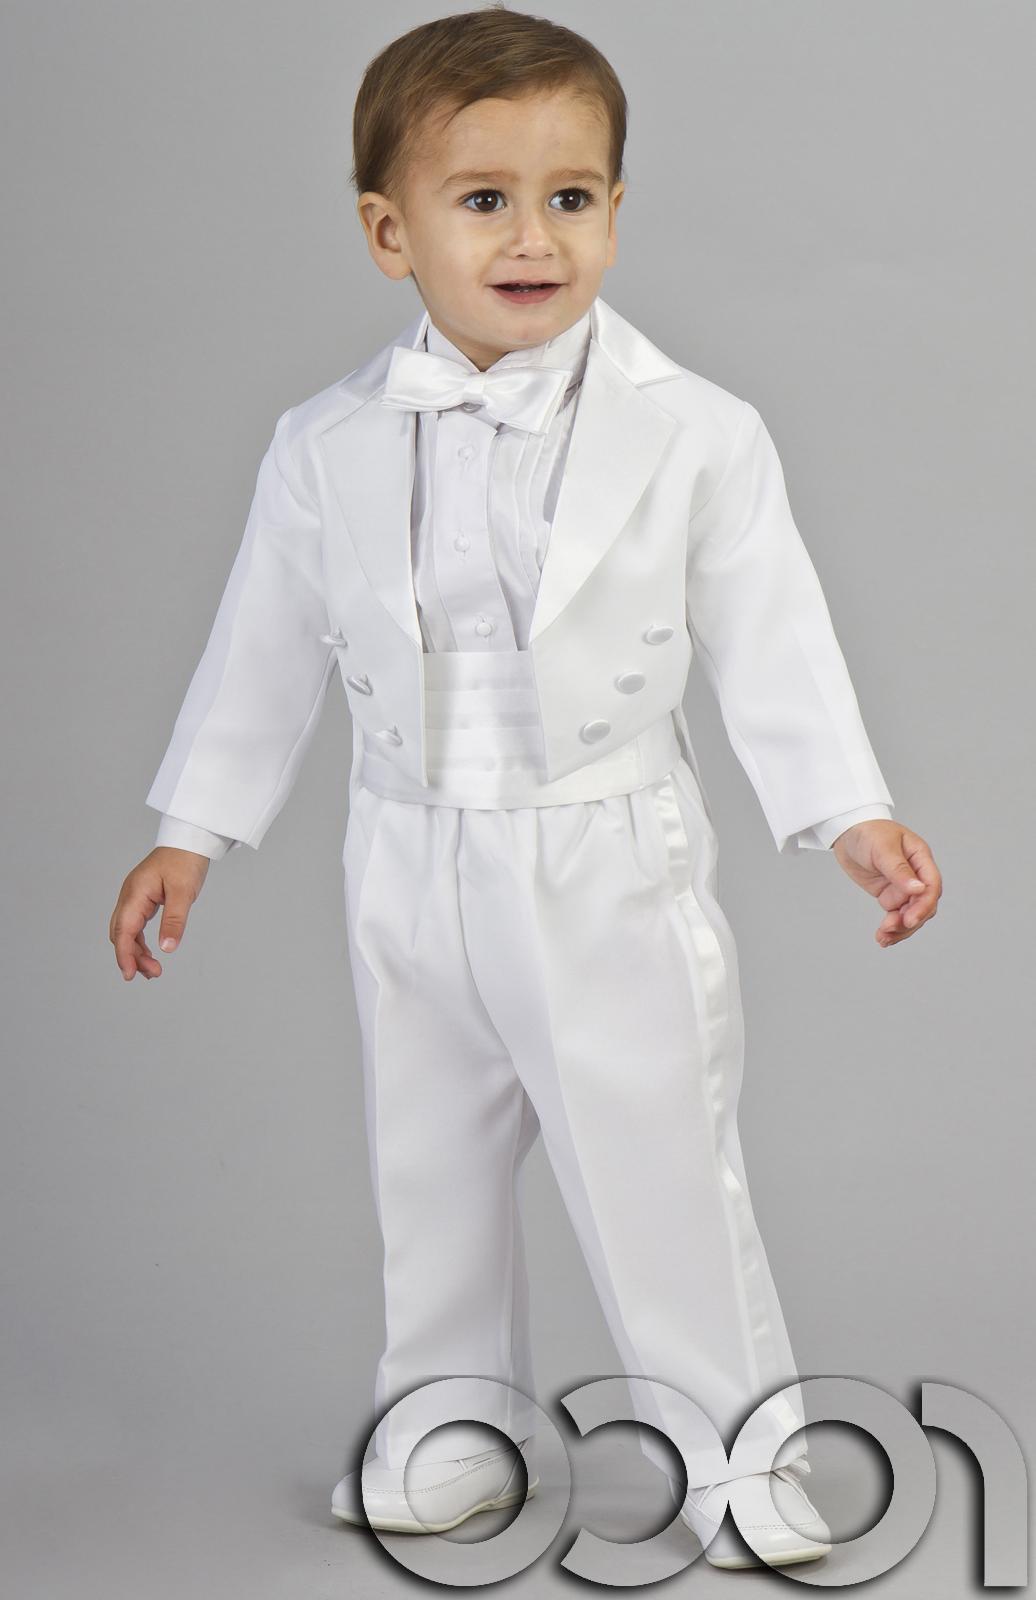 BOYS WHITE TUXEDO CRUISE DINNER WEDDING PAGEBOY TAIL SUIT AGE 0 - 24 MONTHS